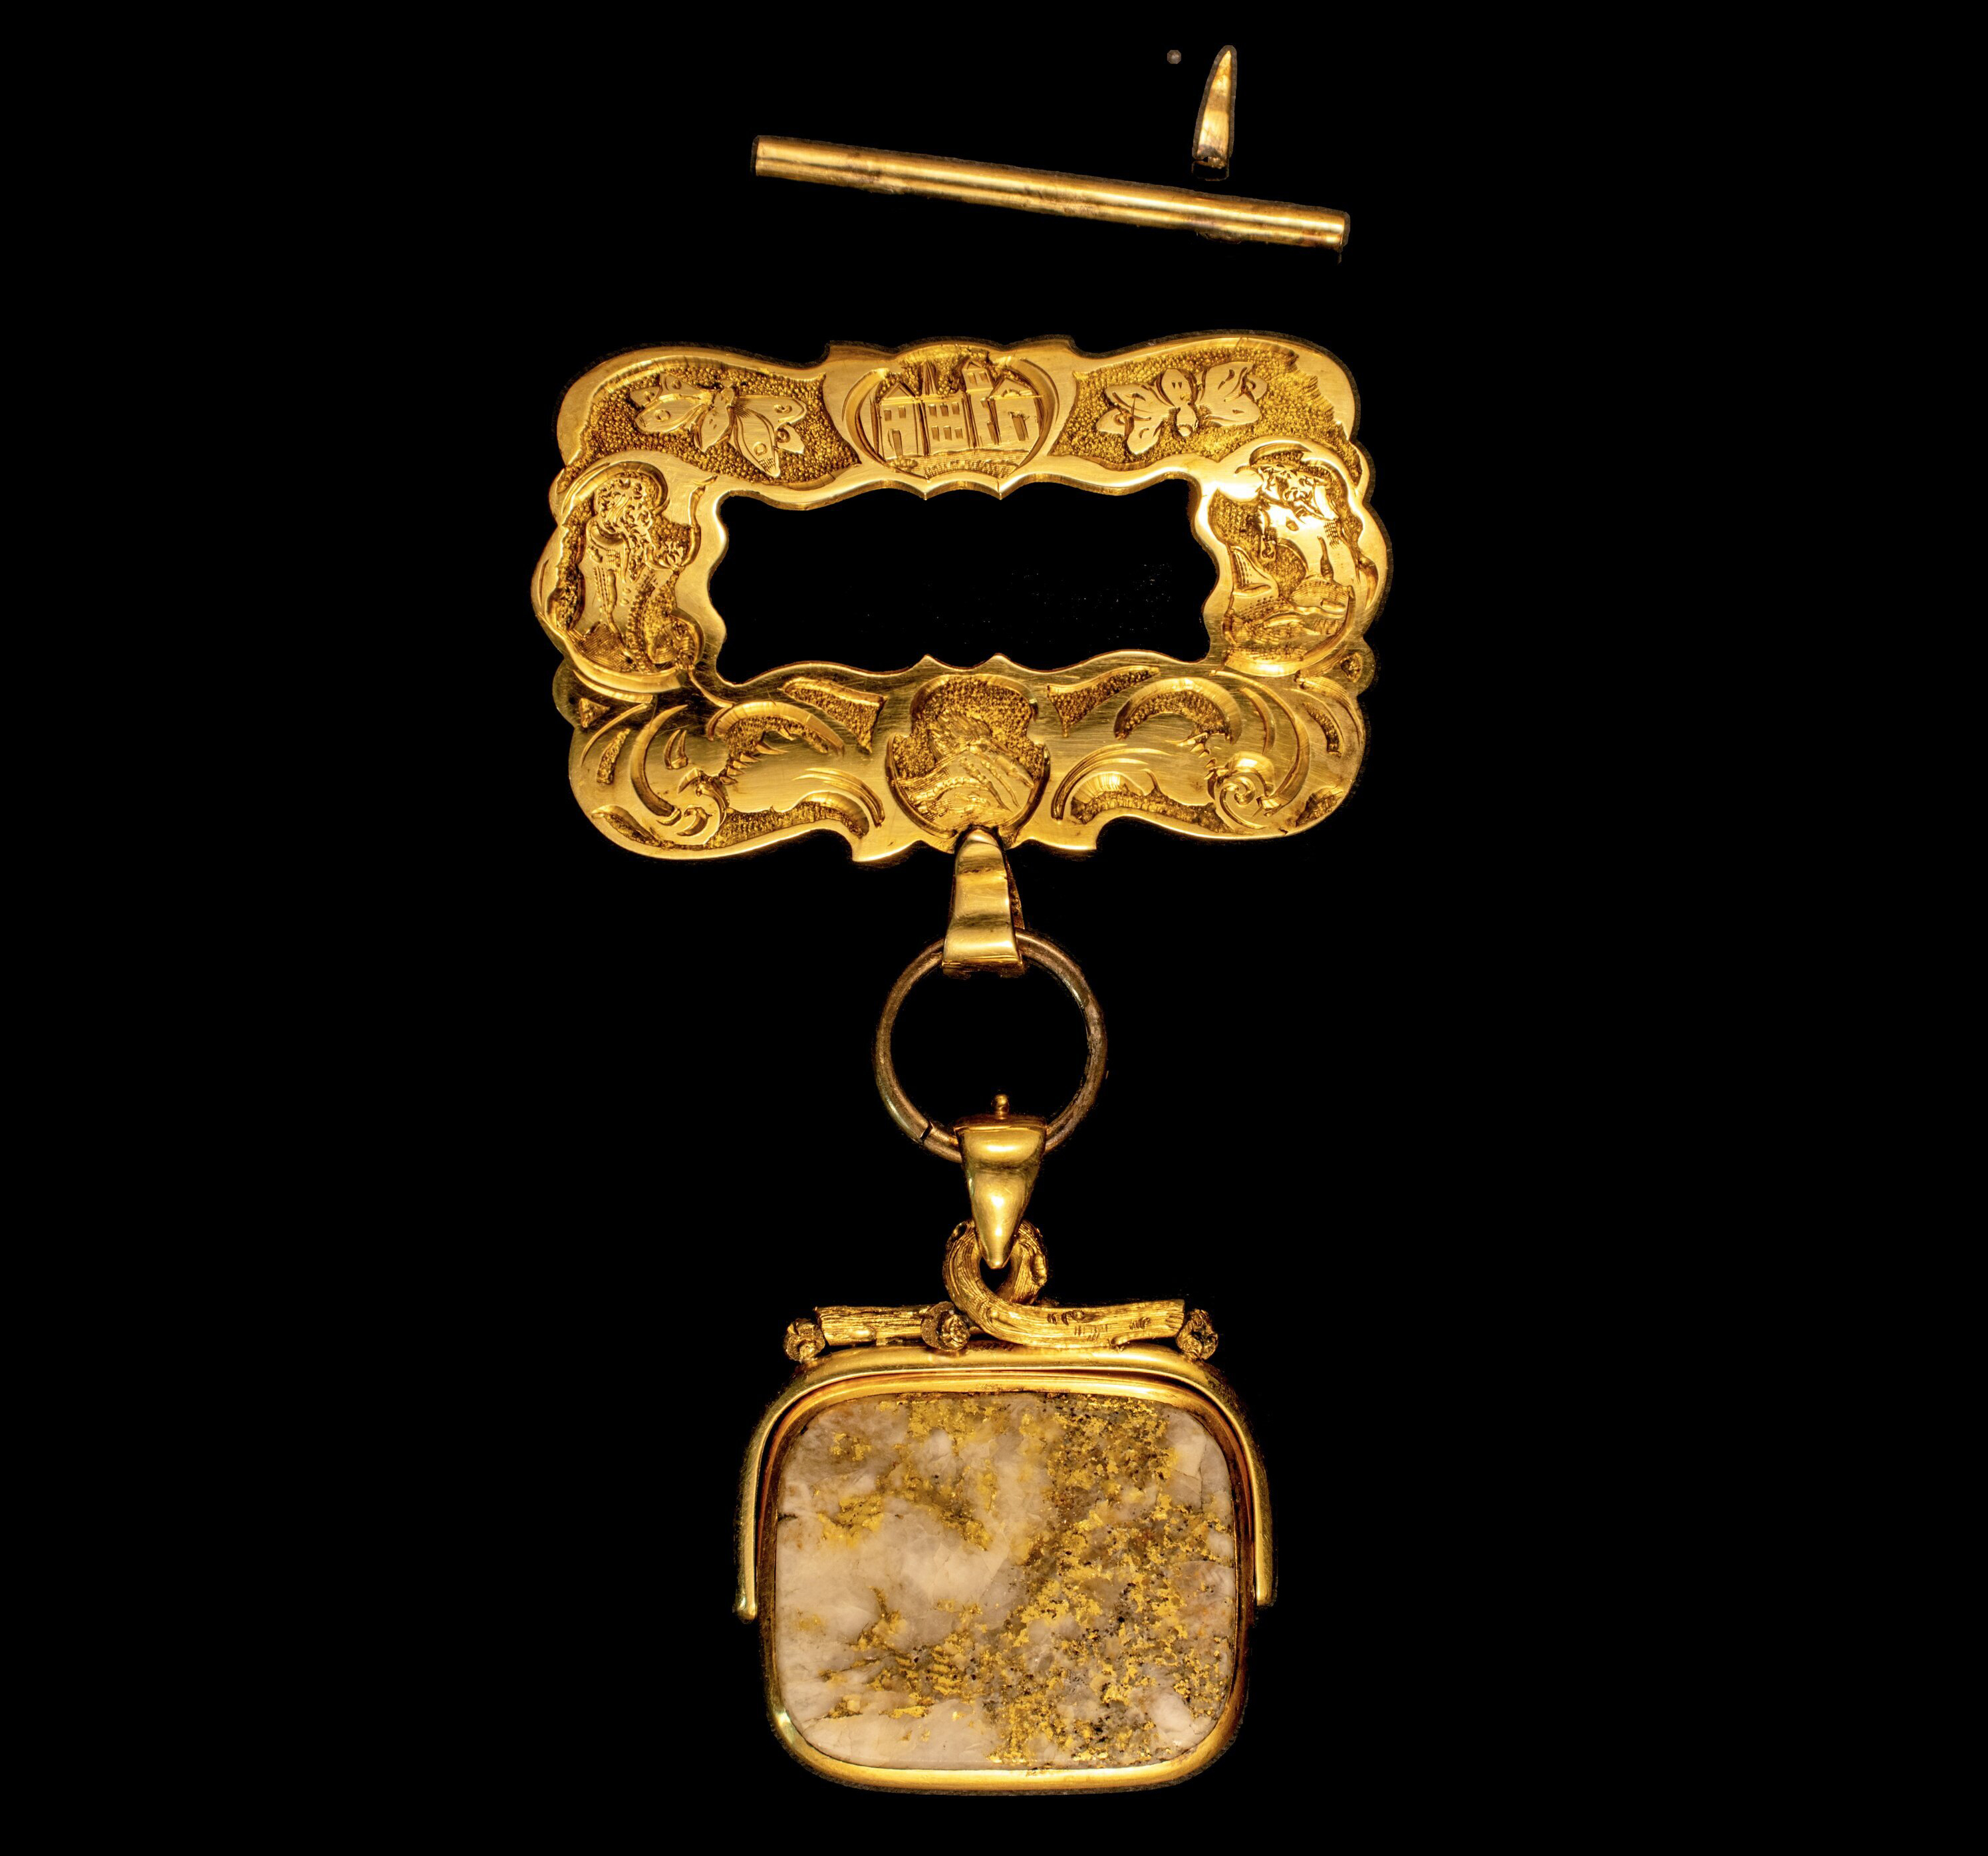 One recovered jewelry item from the SS Central America is a large 18K Gold Rush ore engraved brooch that San Francisco businessman Samuel Brannan was sending to his son in Geneva, Switzerland as a gift for his son's teacher. Photo credit: Holabird Western Americana Collections.